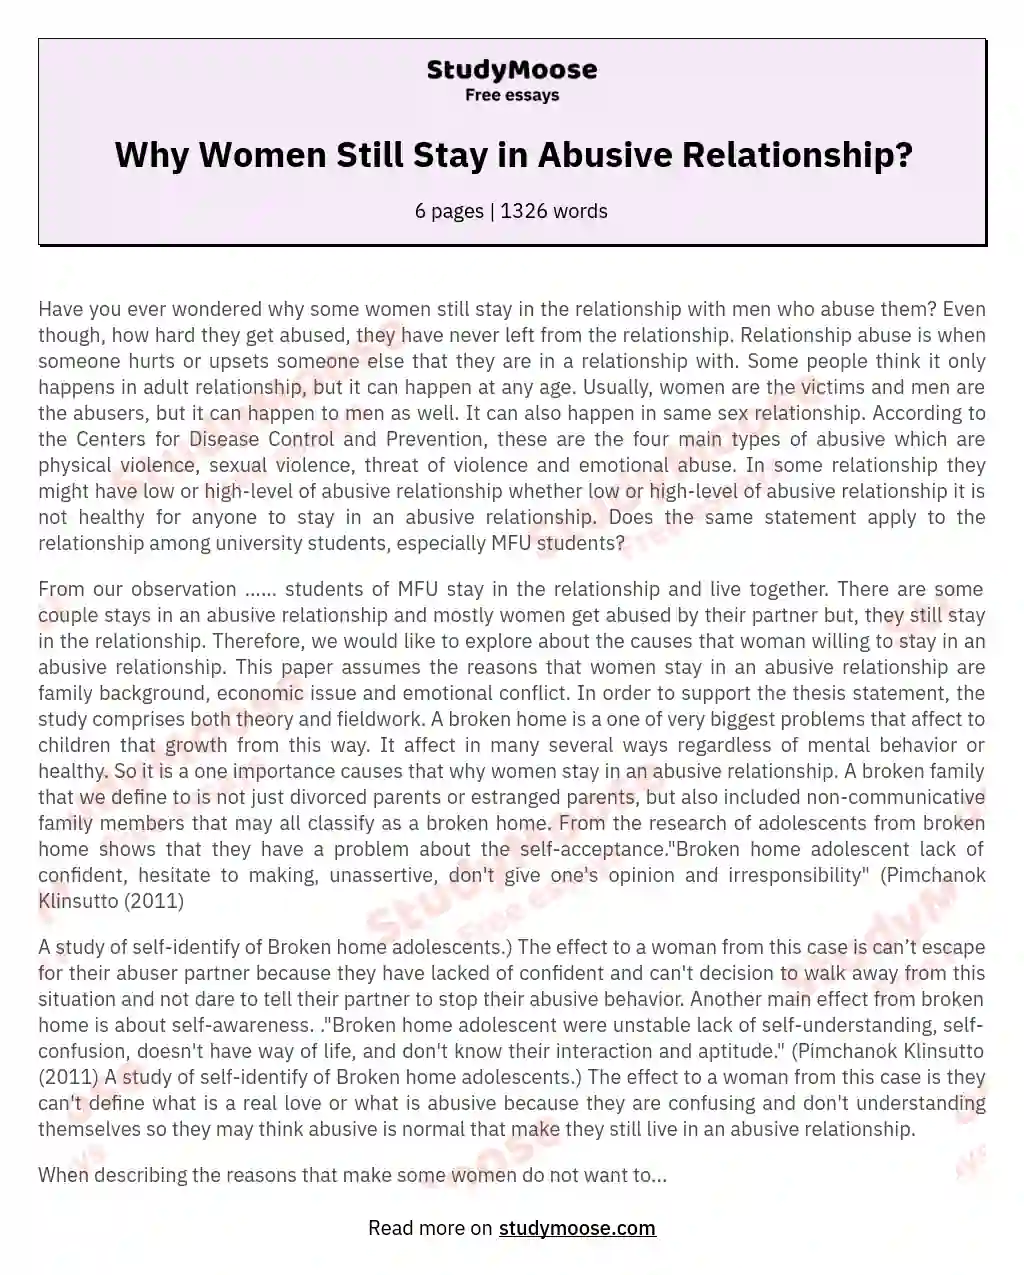 Why Women Still Stay in Abusive Relationship? essay